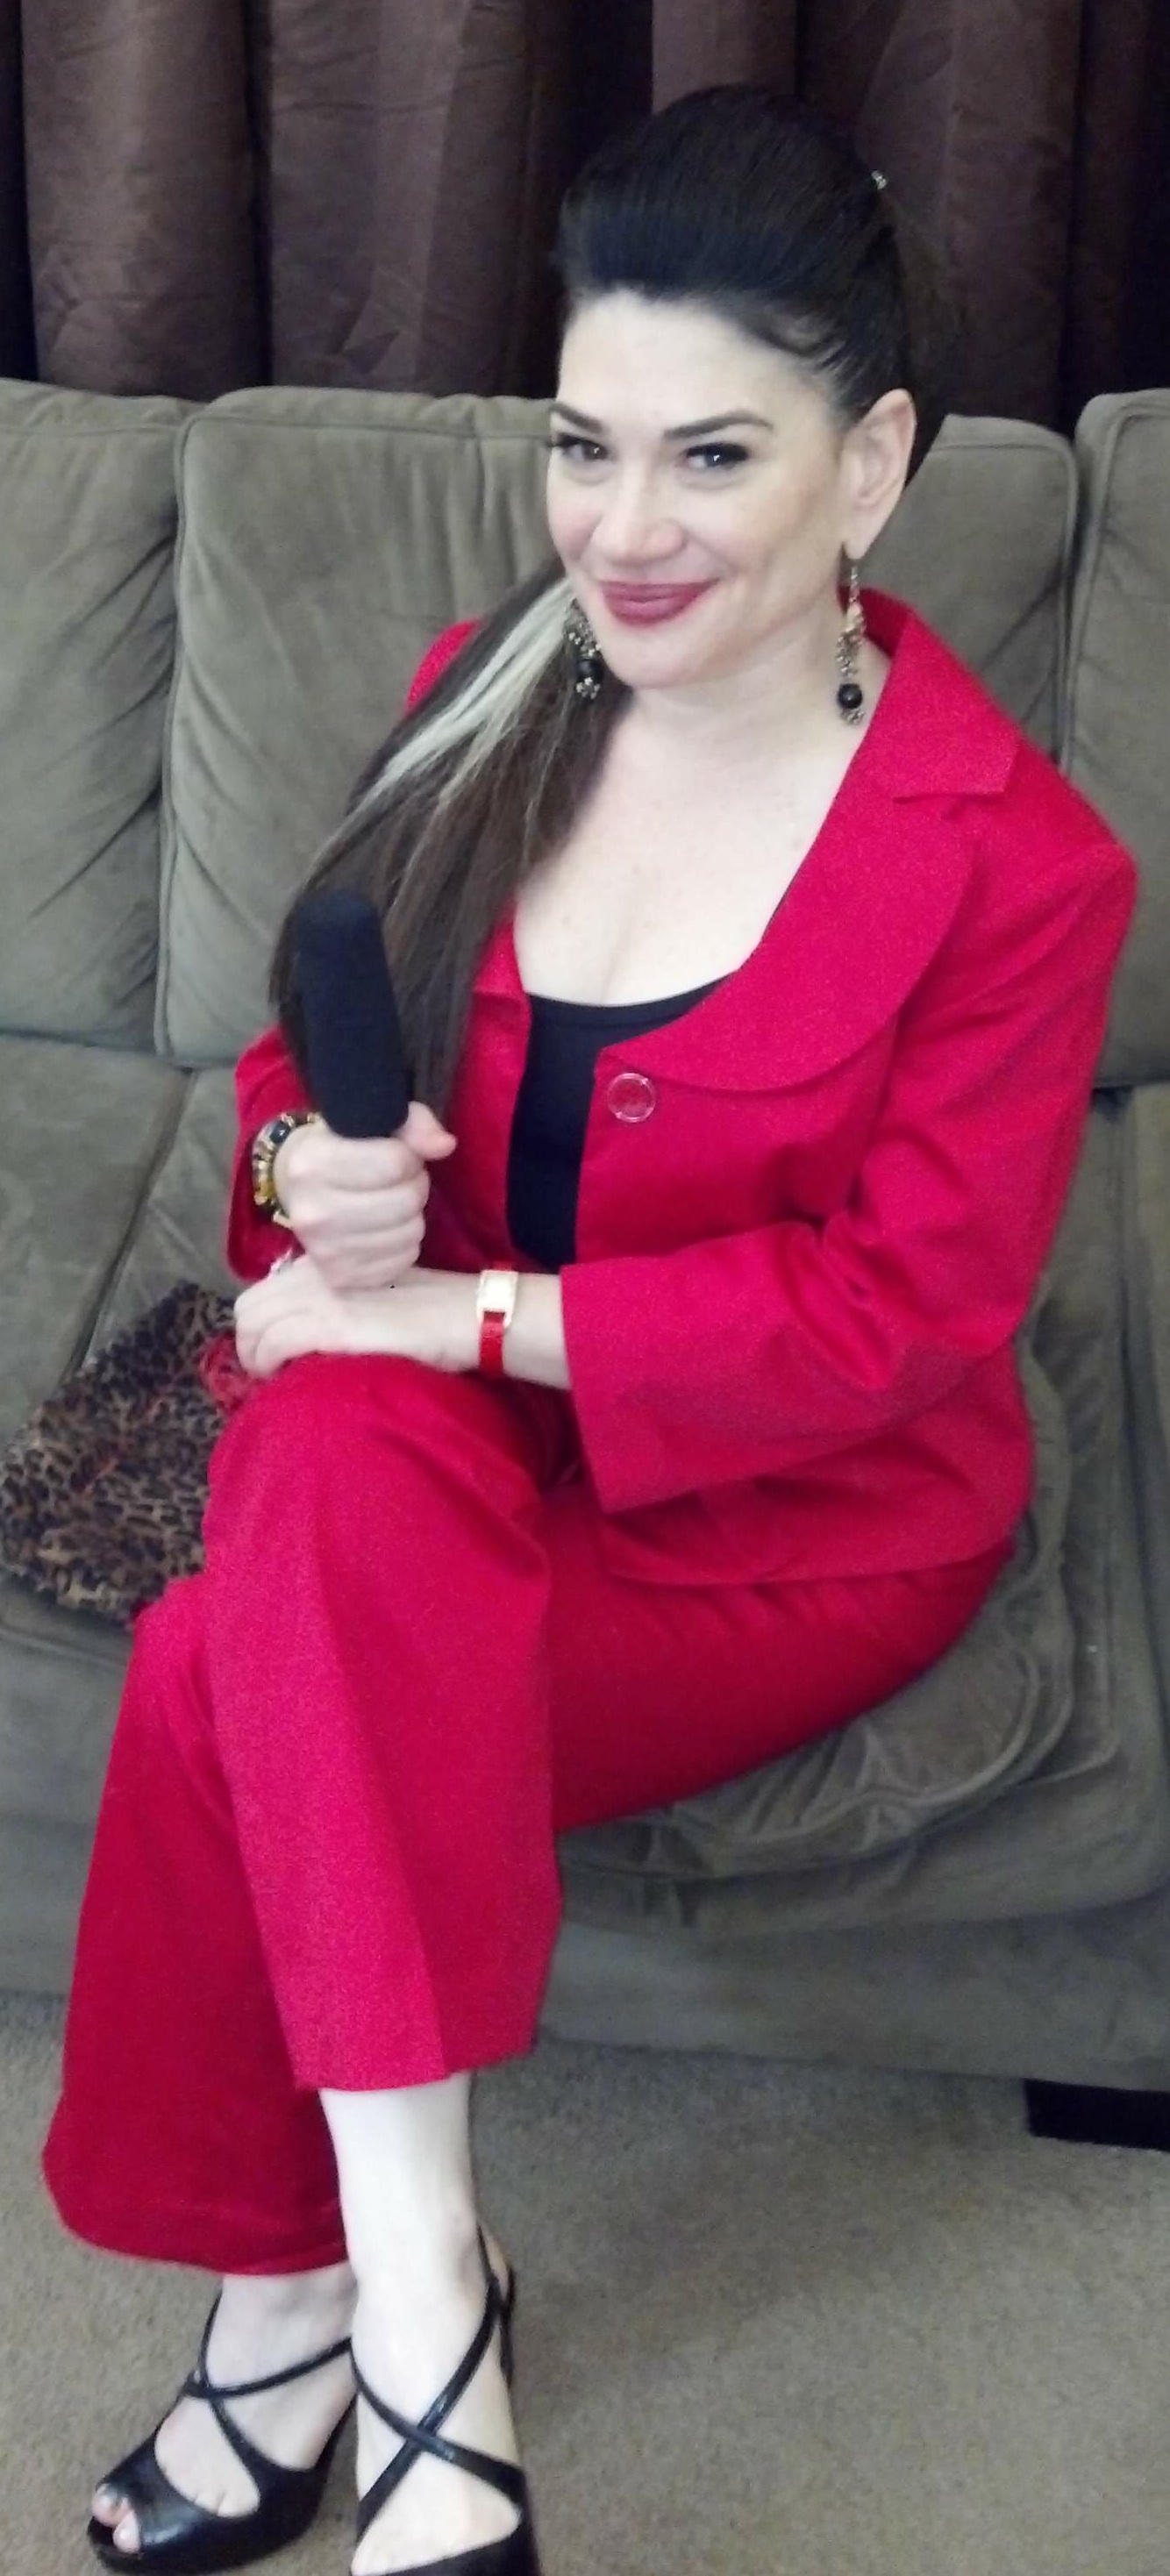 Actress Karen-Eileen Gordon being interviewed by Chain Smoking Monkey Productions in Los Angeles, California